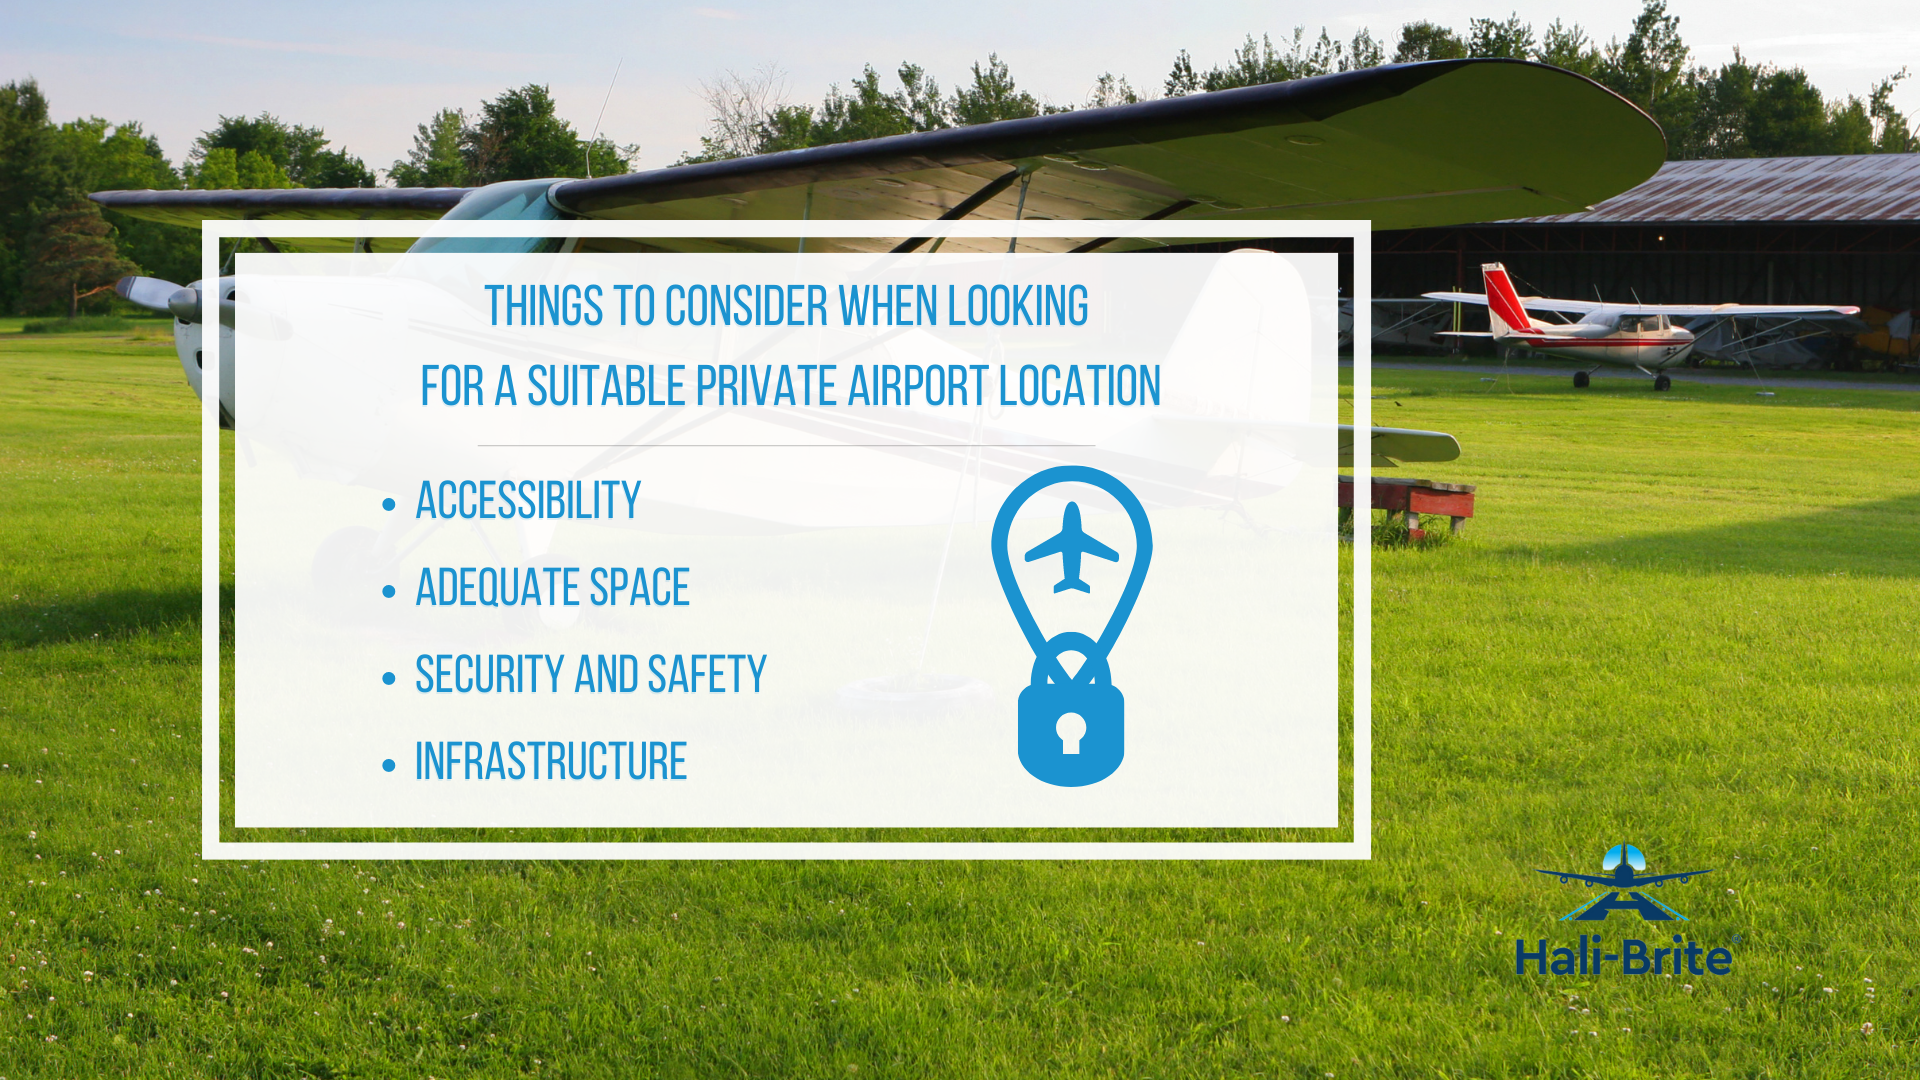 Infographic image of things to consider when looking for a suitable private airport location